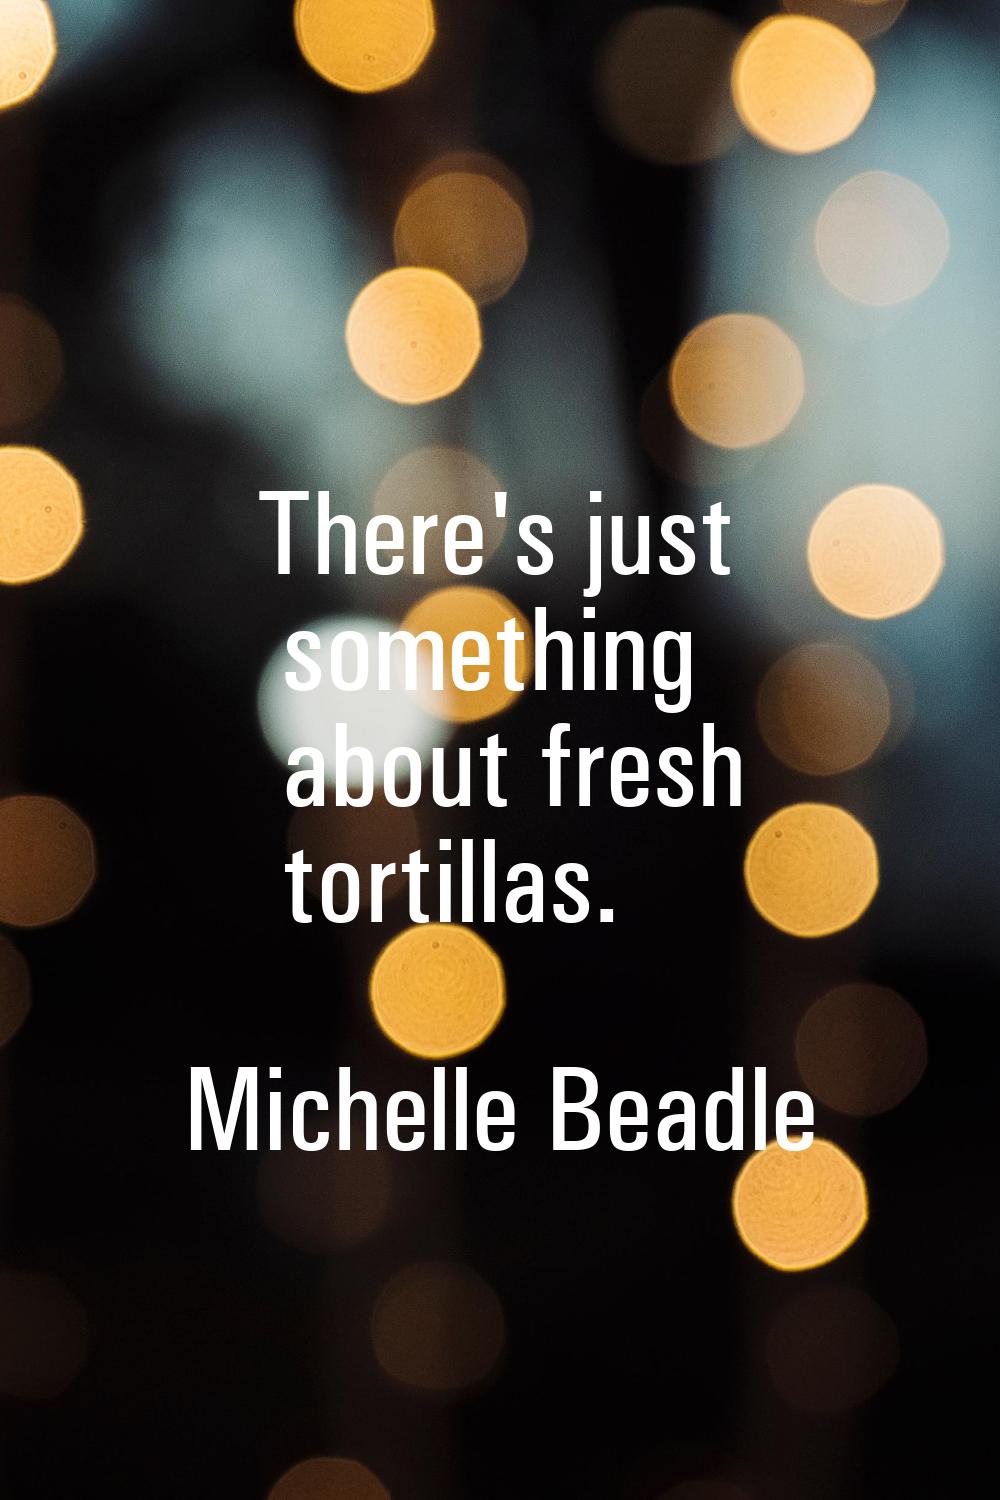 There's just something about fresh tortillas.